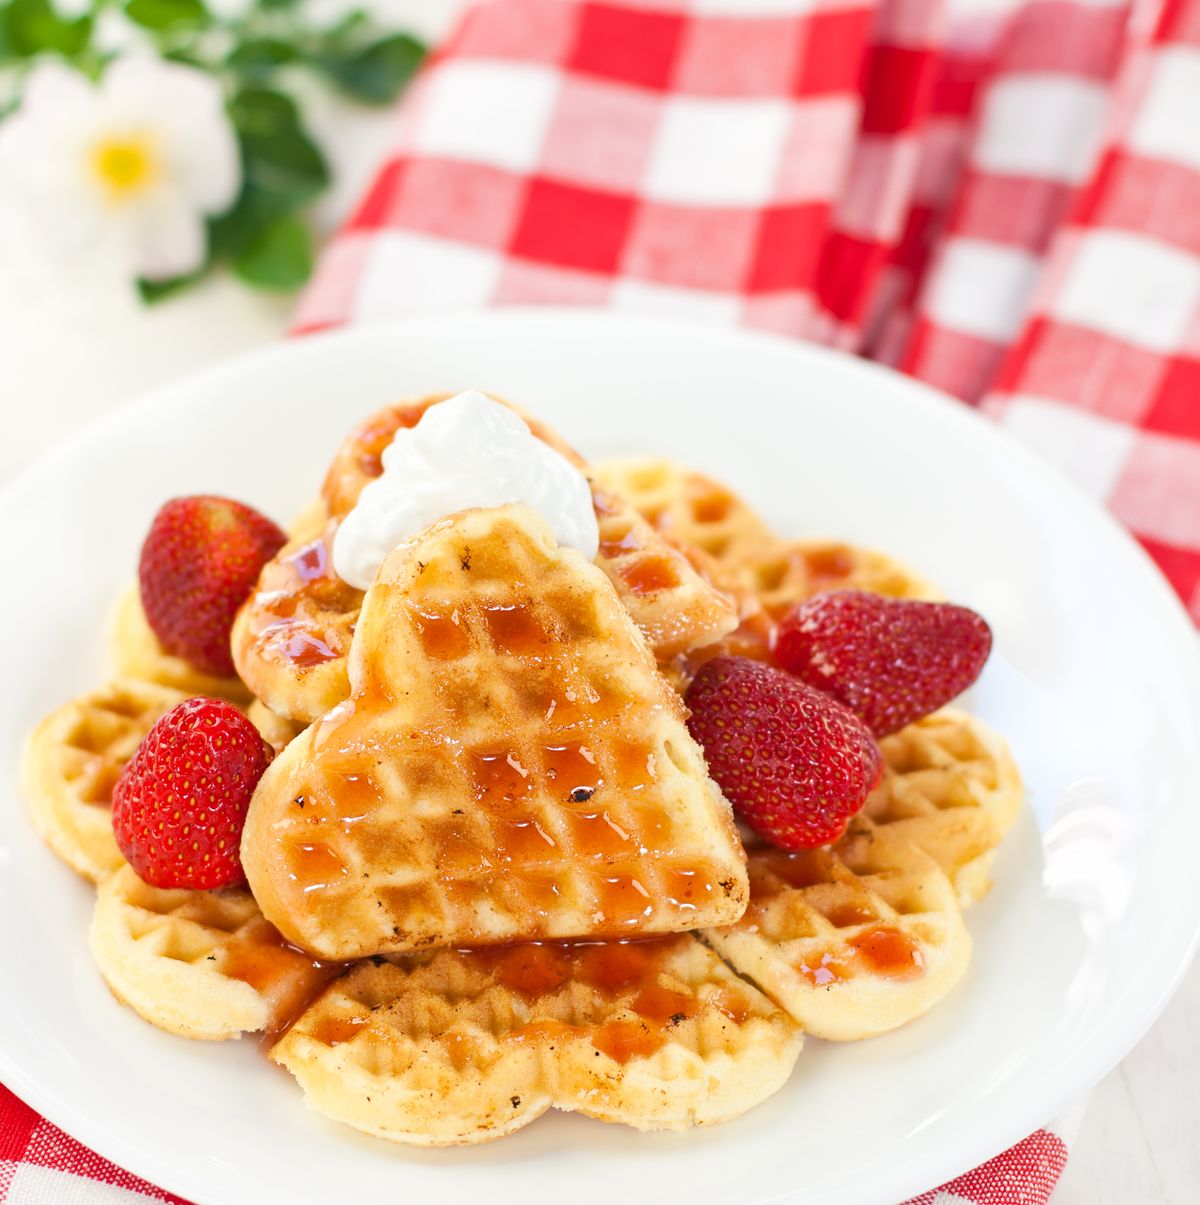 https://hips.hearstapps.com/hmg-prod/images/waffles-with-strawberries-royalty-free-image-175401549-1546445594.jpg?crop=1.00xw:0.828xh;0,0&resize=1200:*